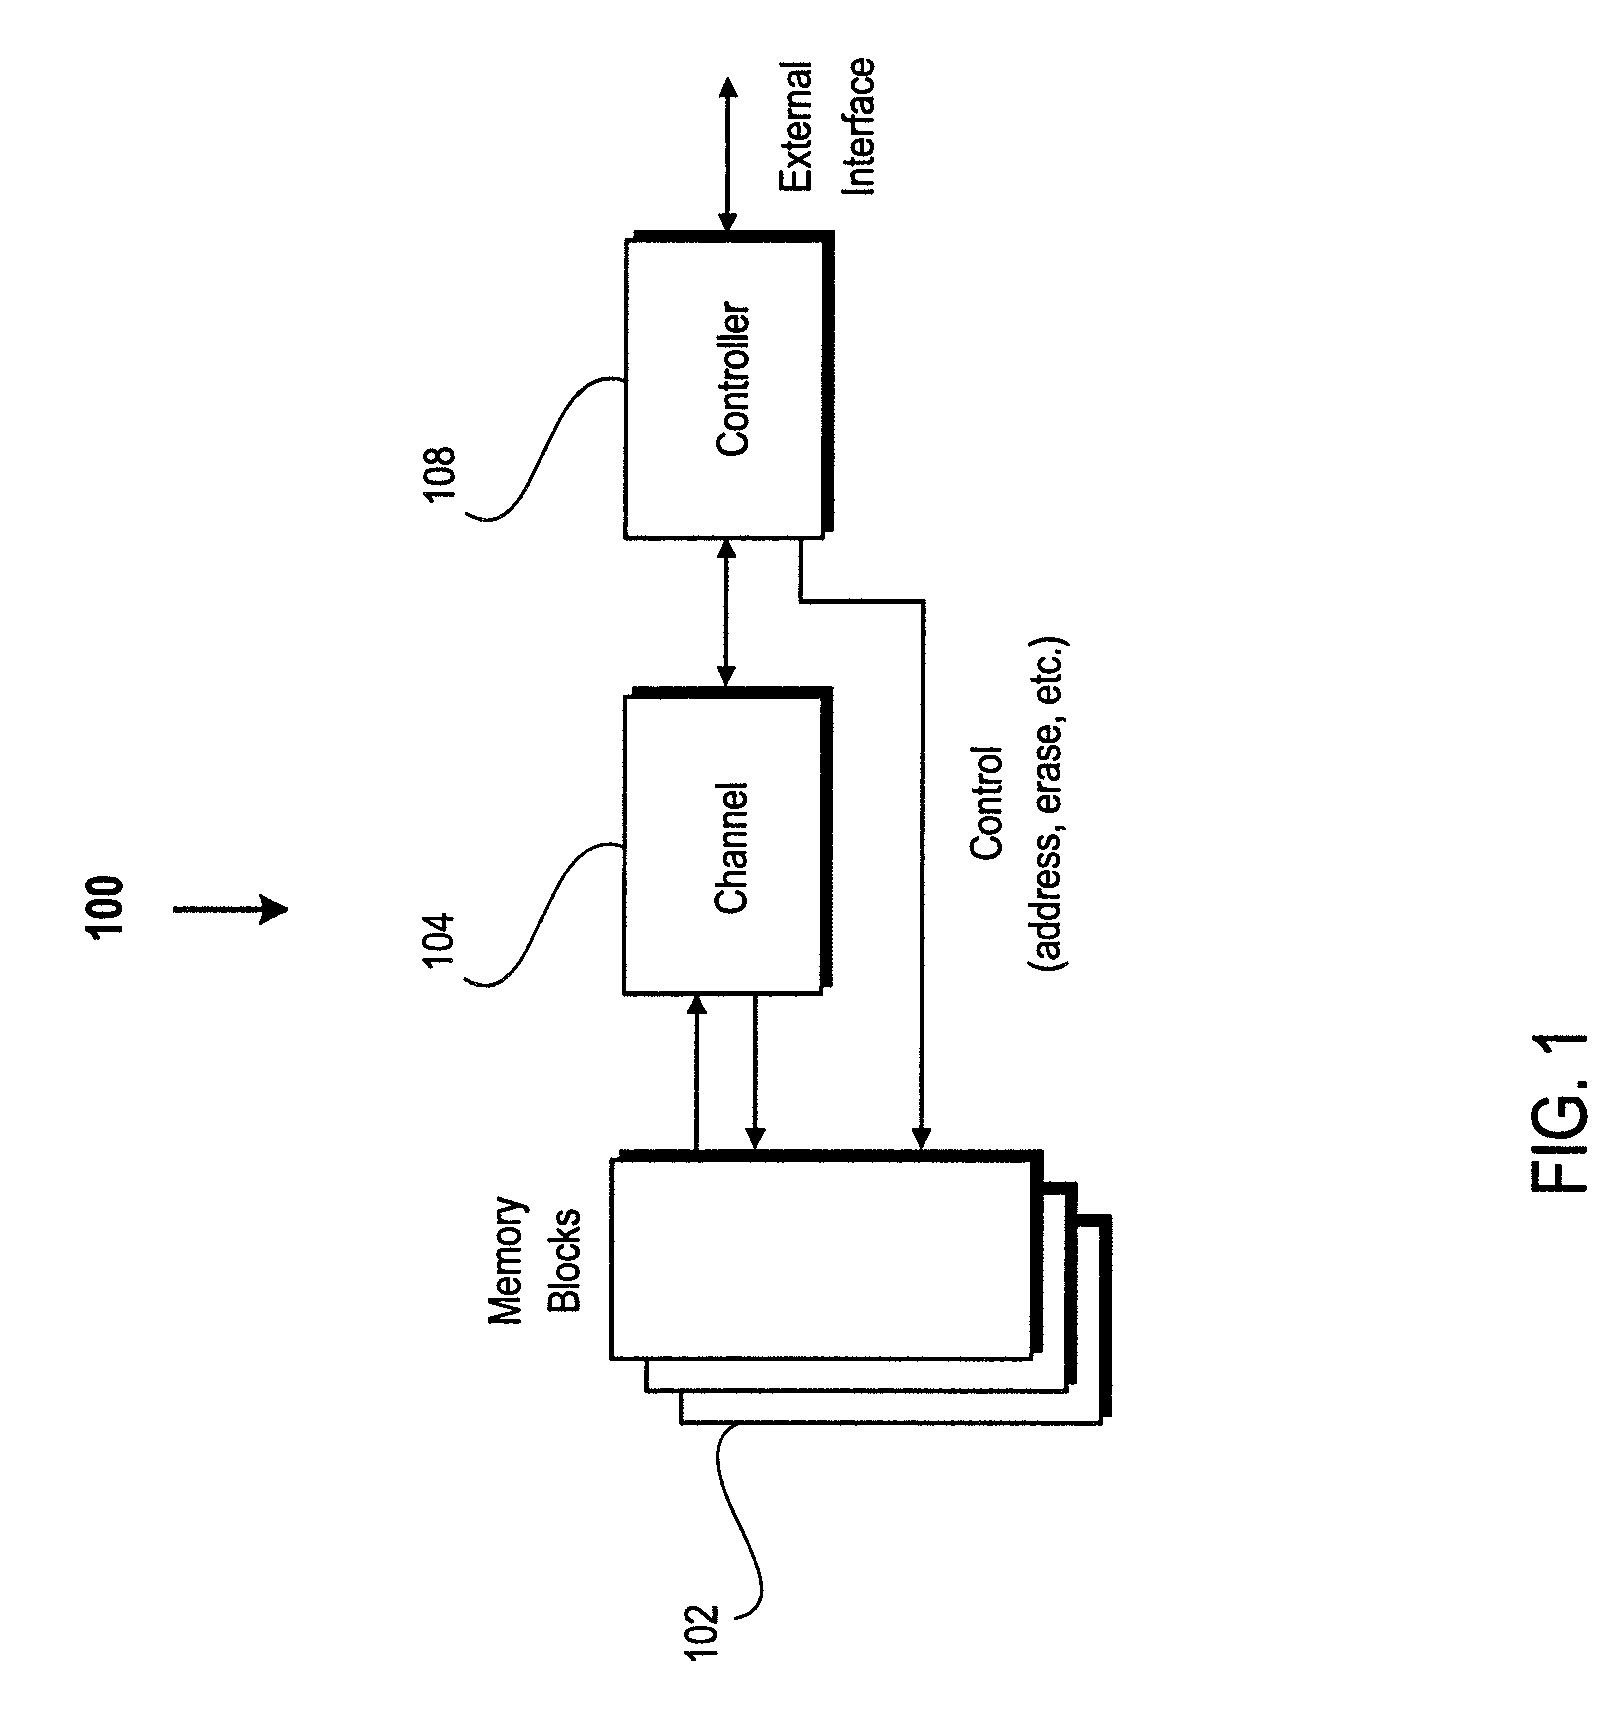 Multi-level signal memory with LDPC and interleaving